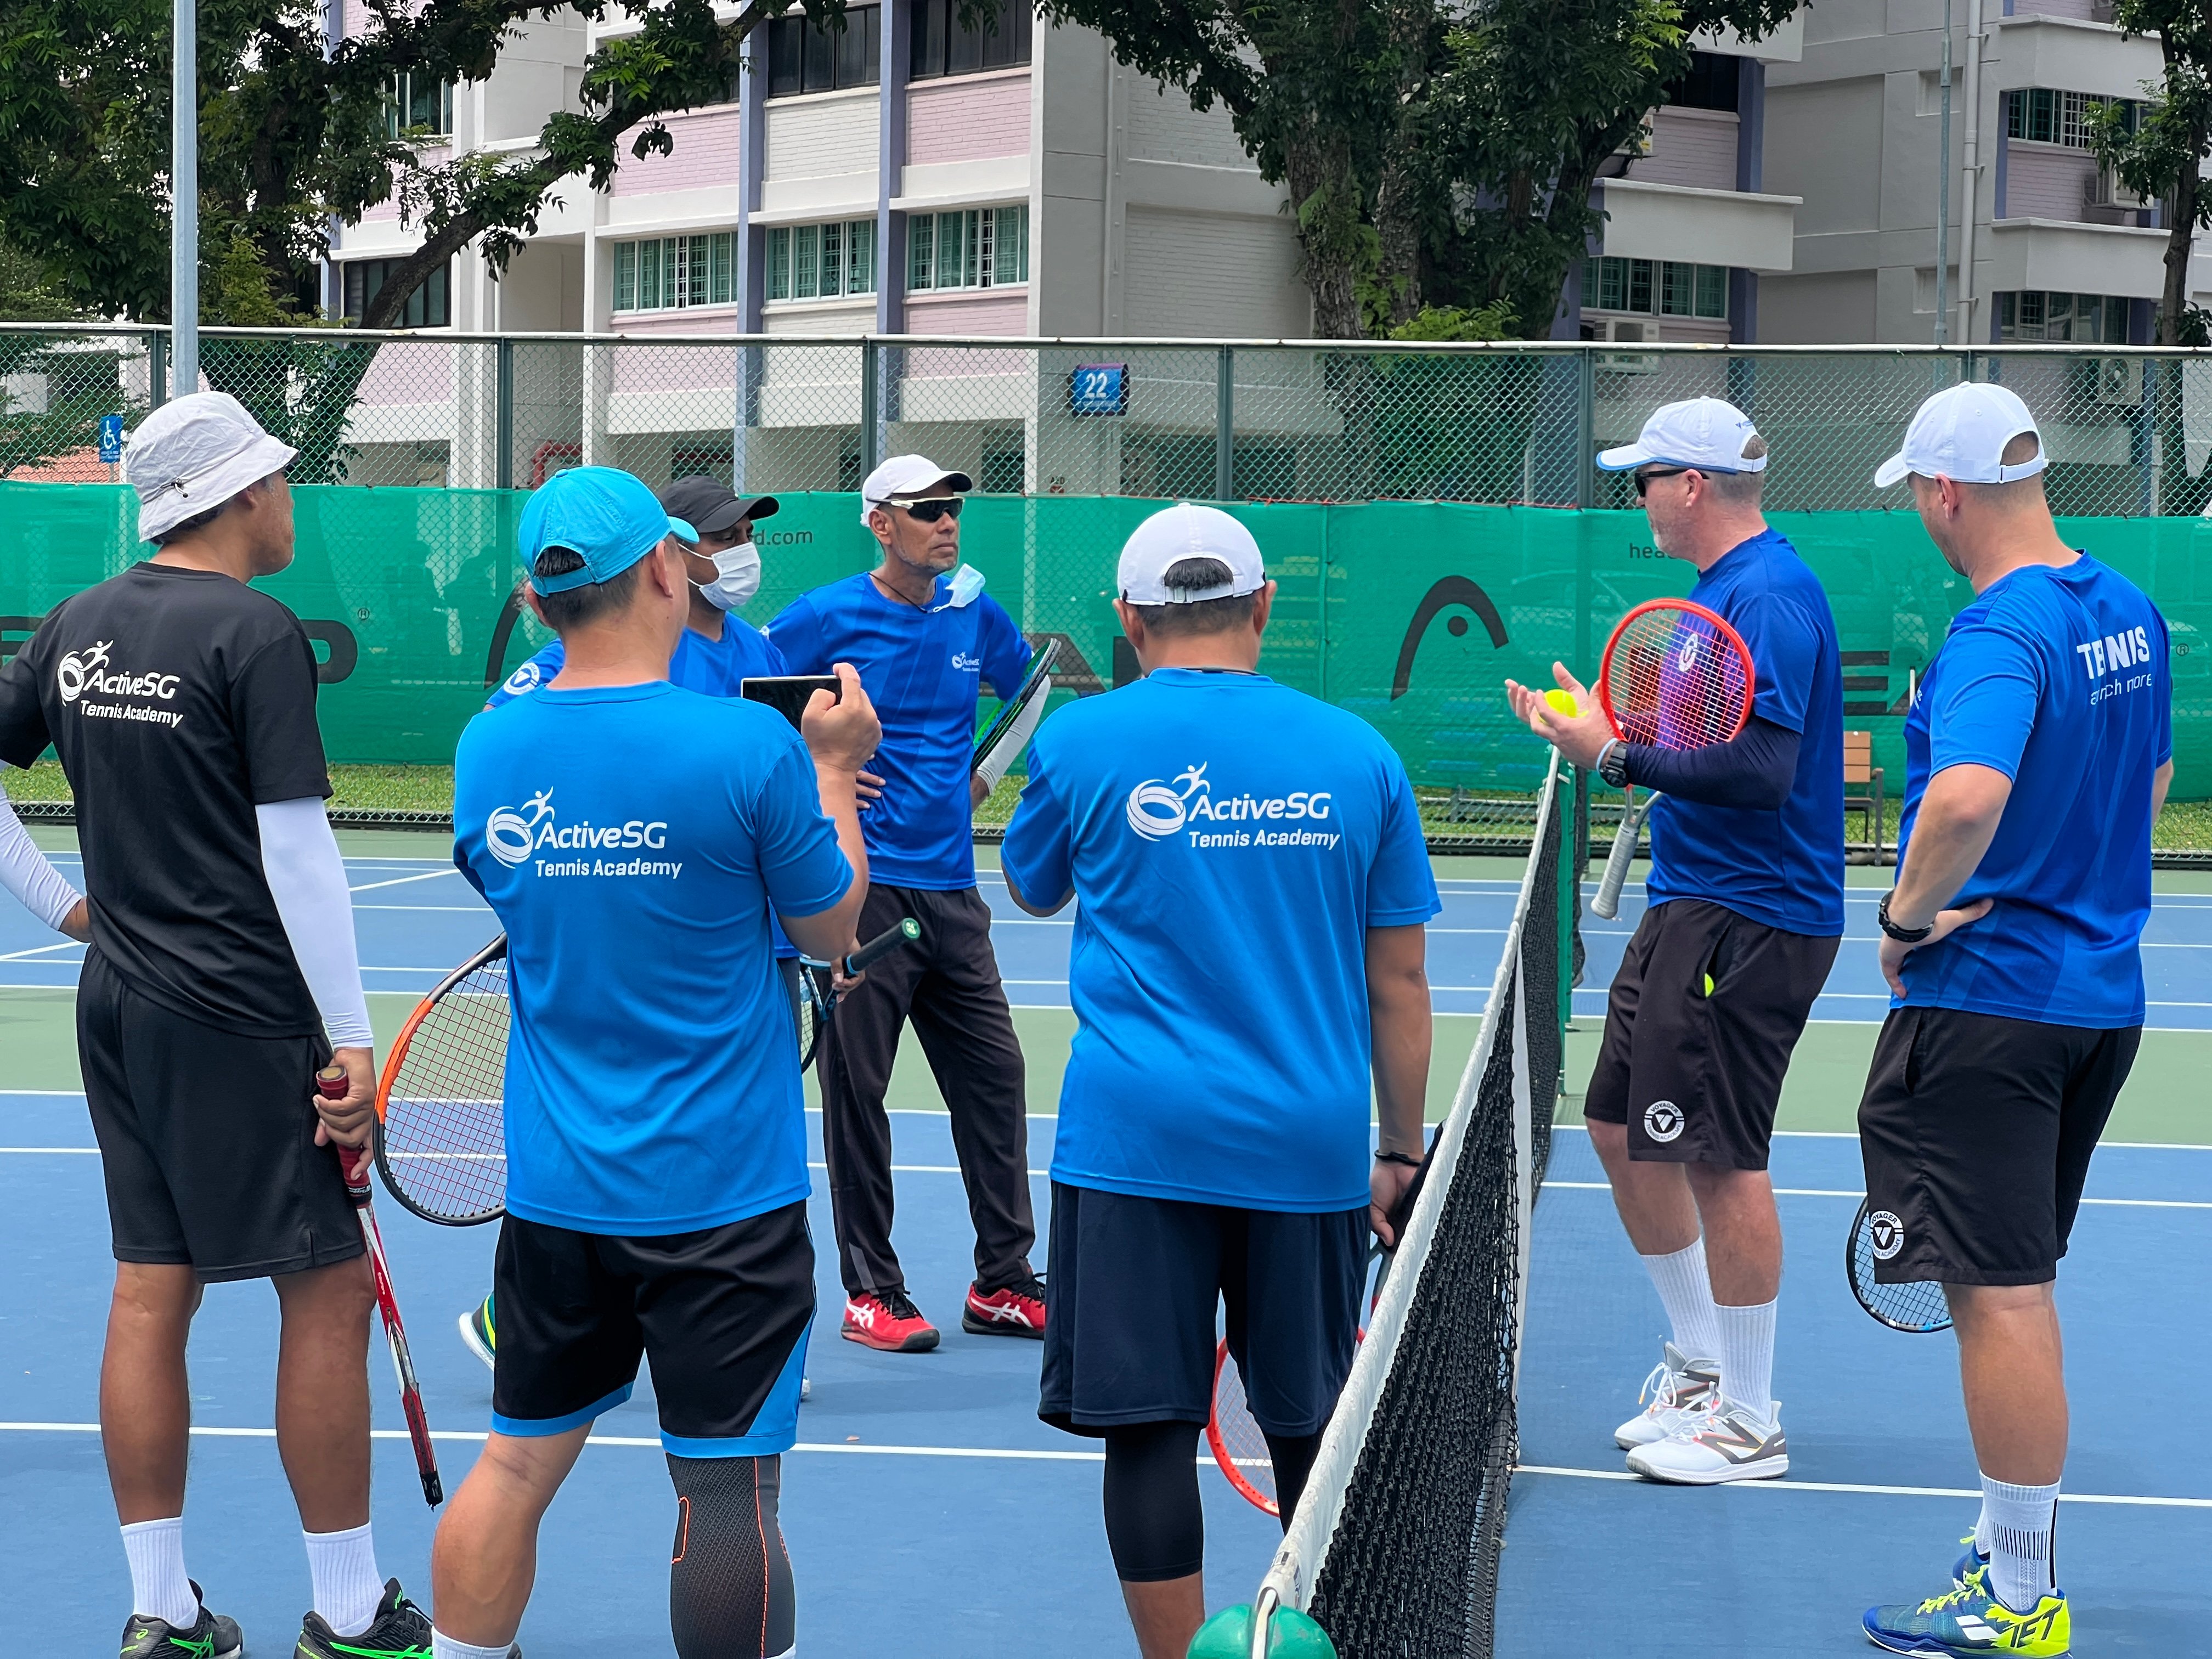 Australia's top youth tennis coach conducts workshops for ActiveSG Tennis Academy!